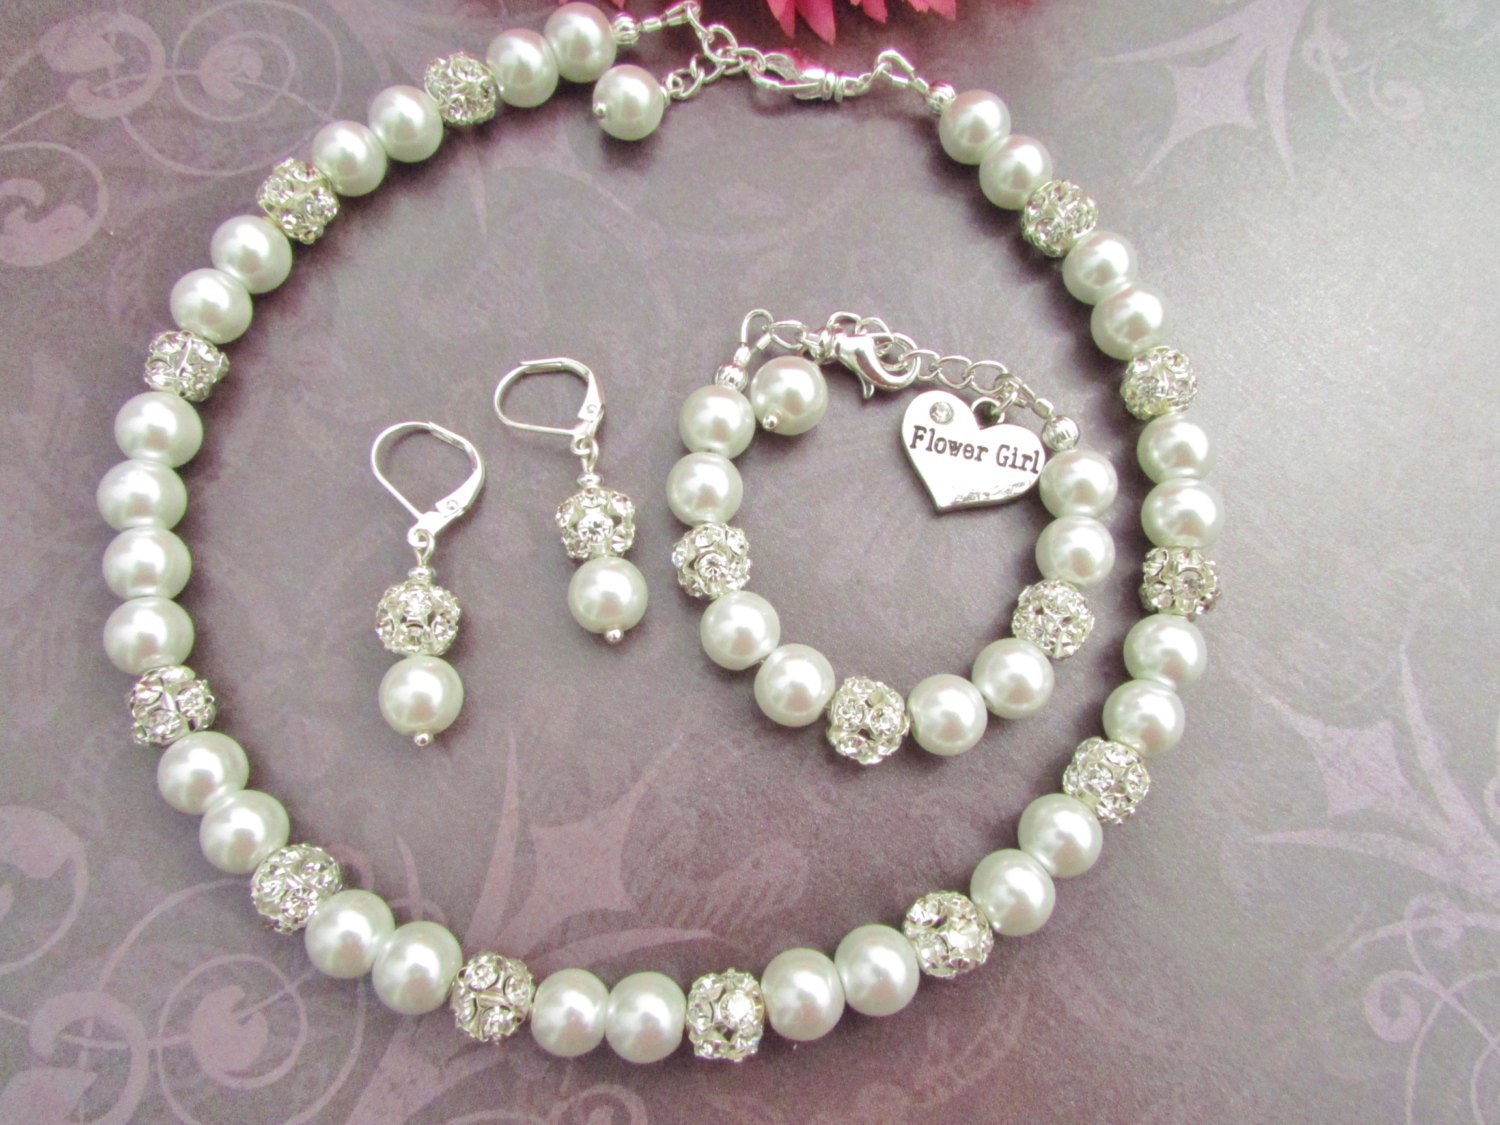 Flower Girl Jewelry Set Junior Bridesmaid Gift Baby Necklace